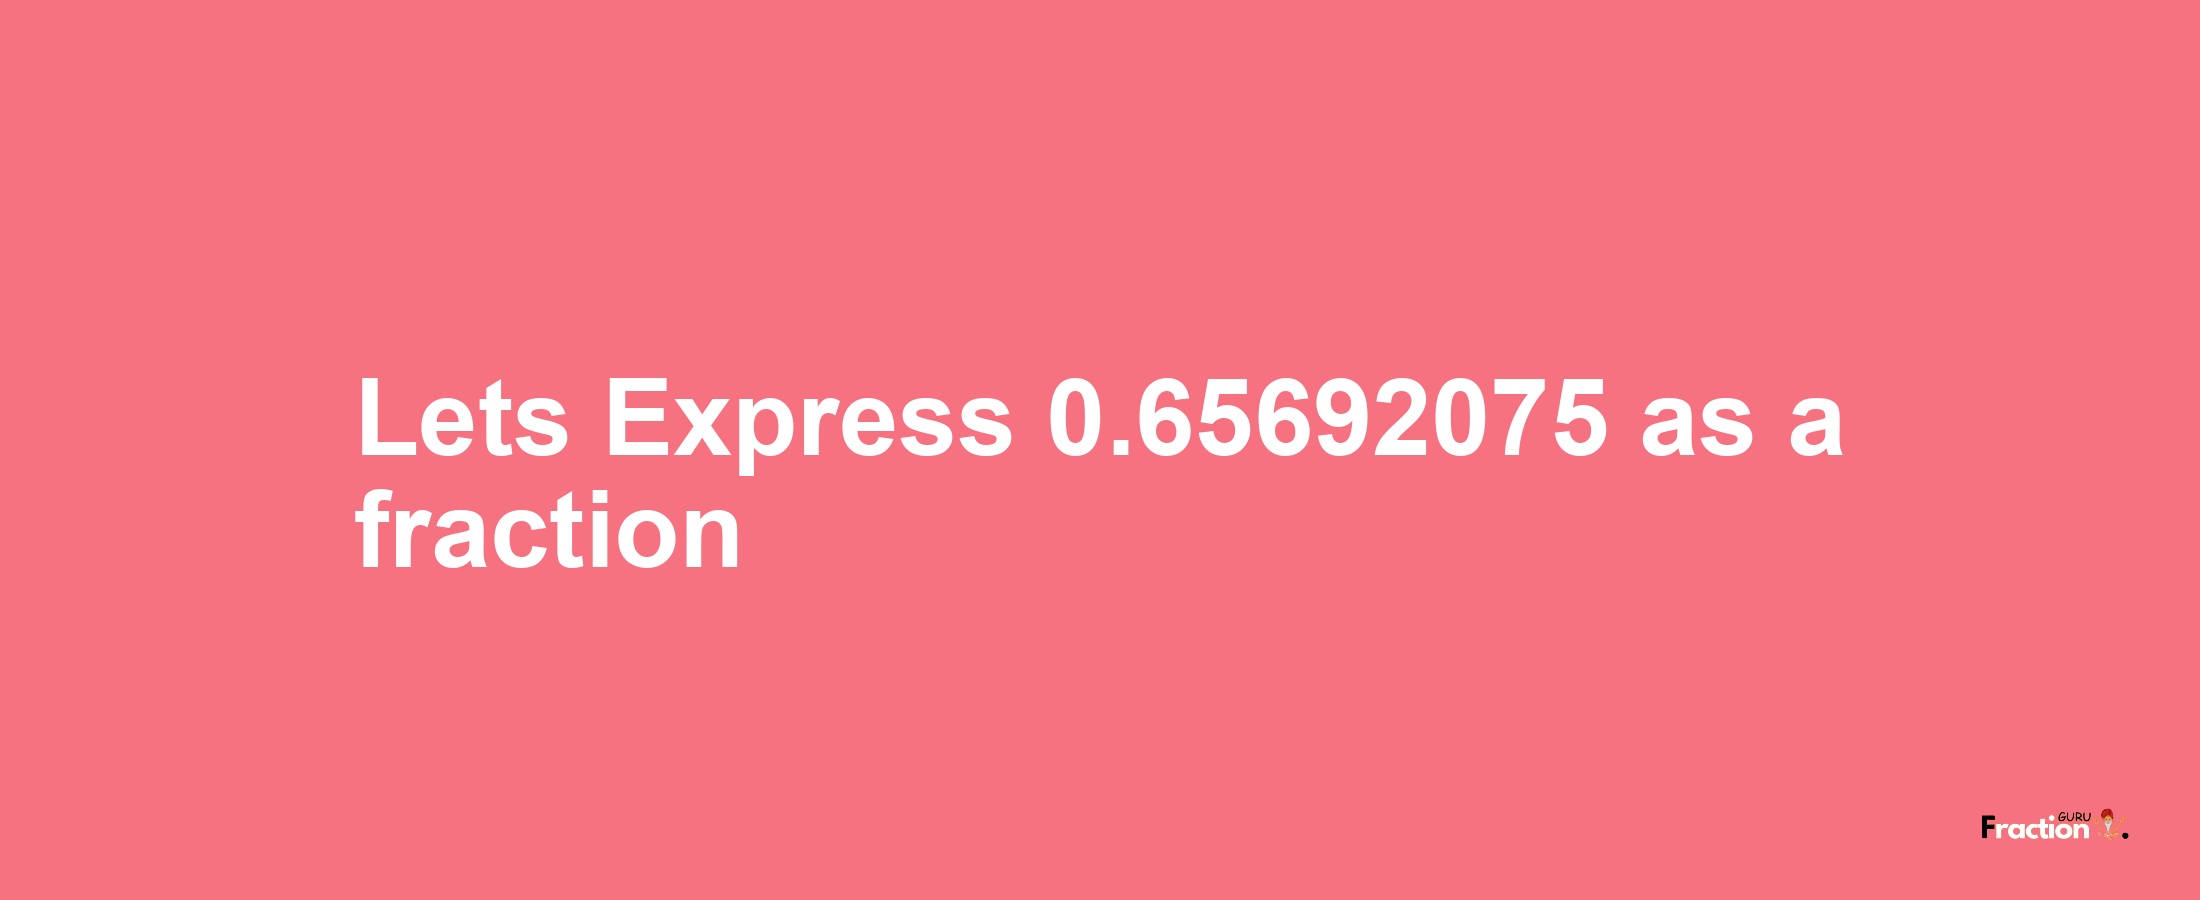 Lets Express 0.65692075 as afraction